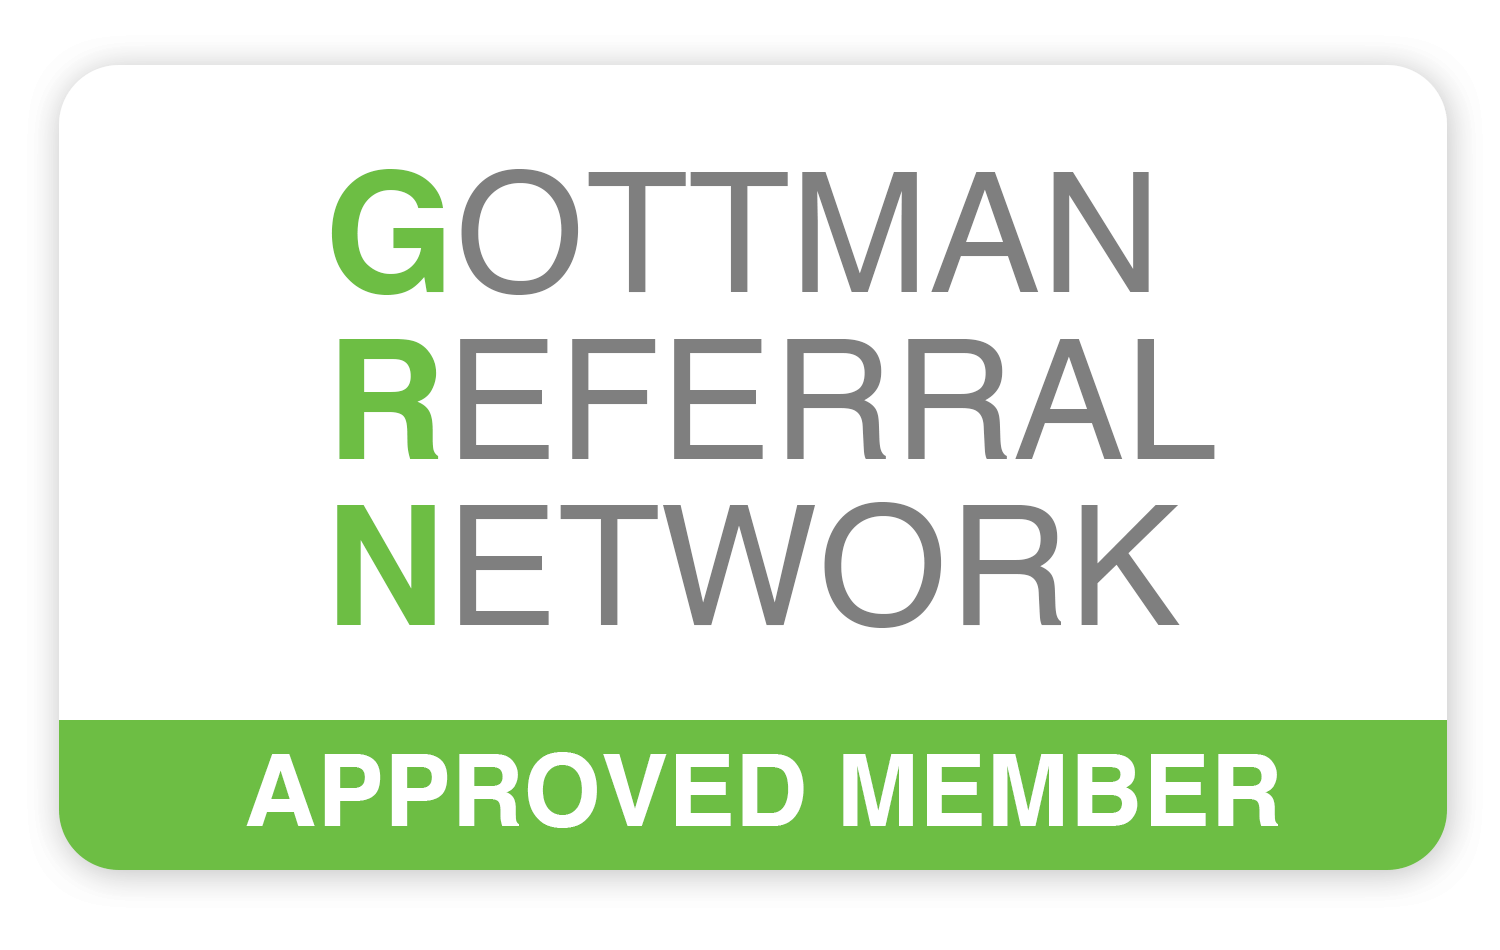 Gottman Referral Network for the Gottman Method couples therapy